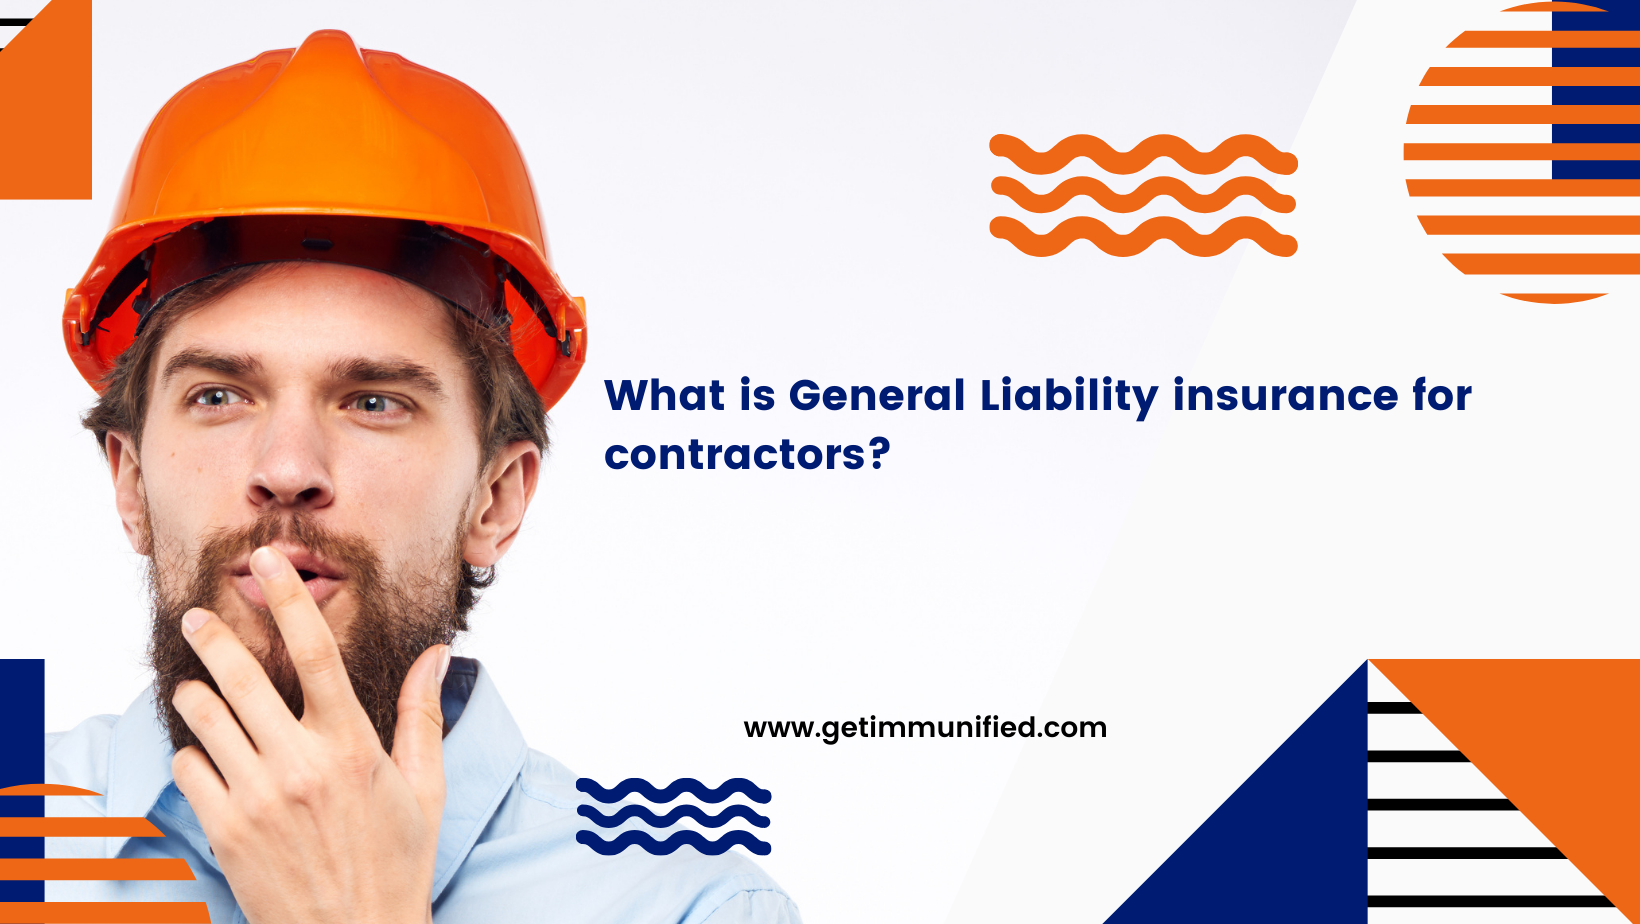 What is General Liability insurance for contractors?